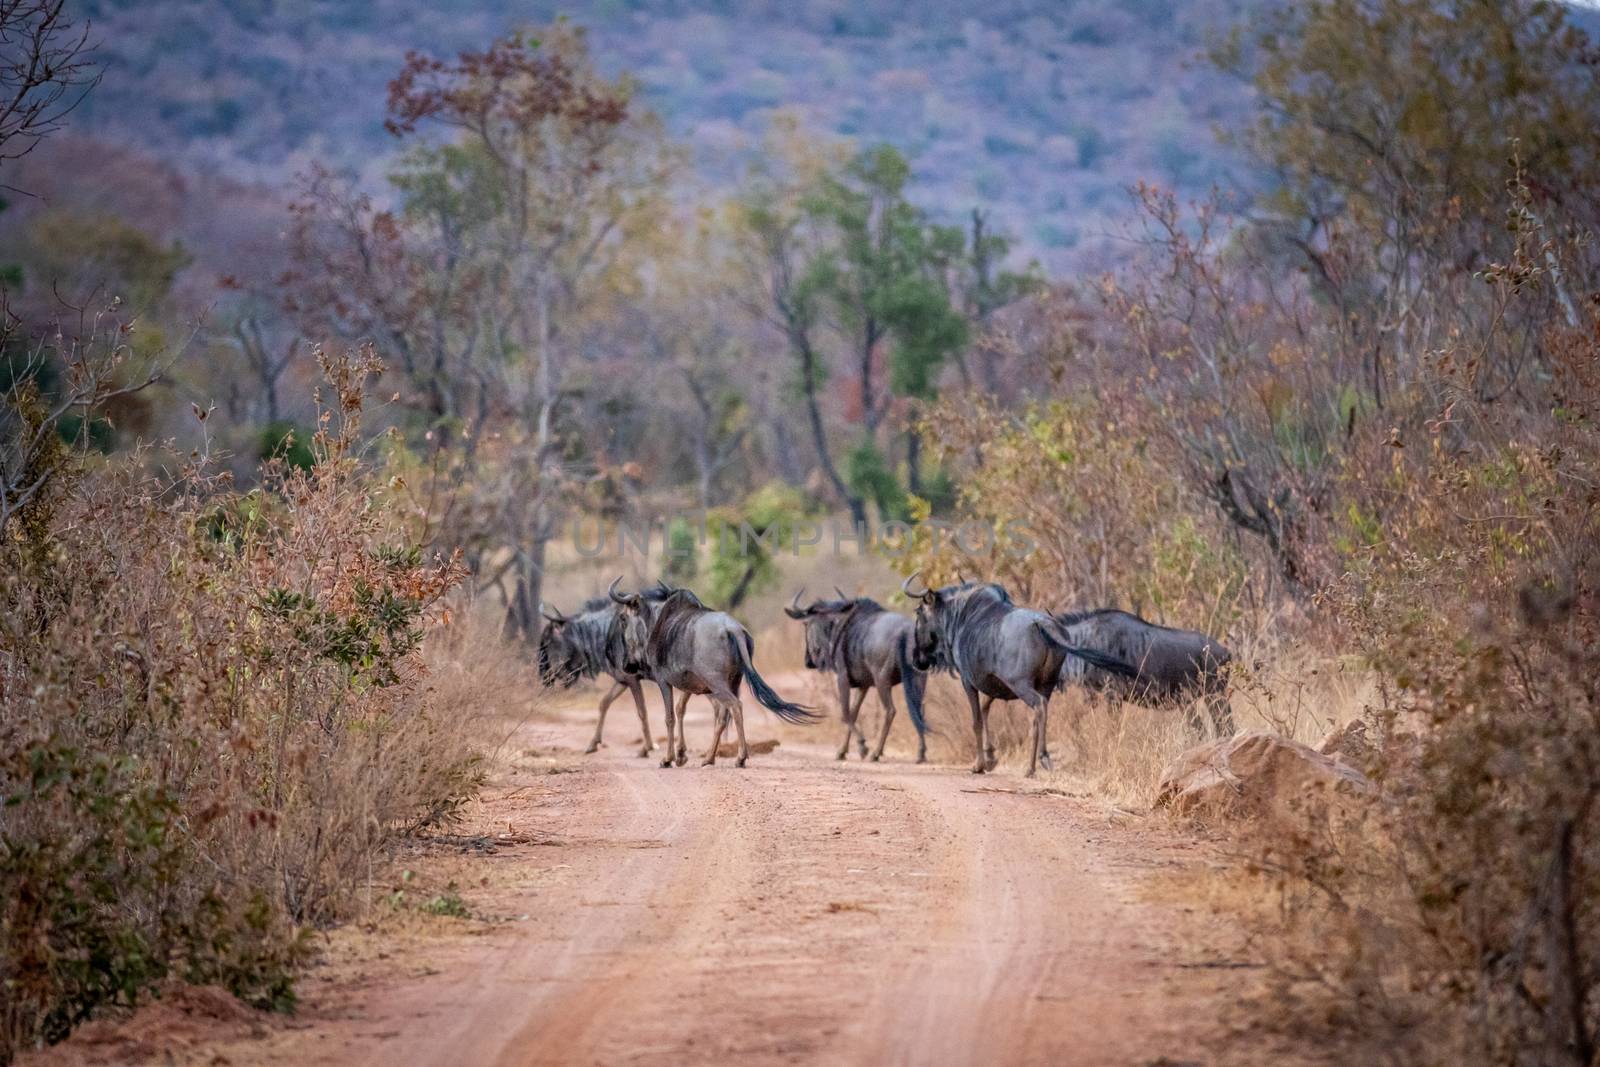 Blue Wildebeest standing in the road in the Welgevonden game reserve, South Africa.